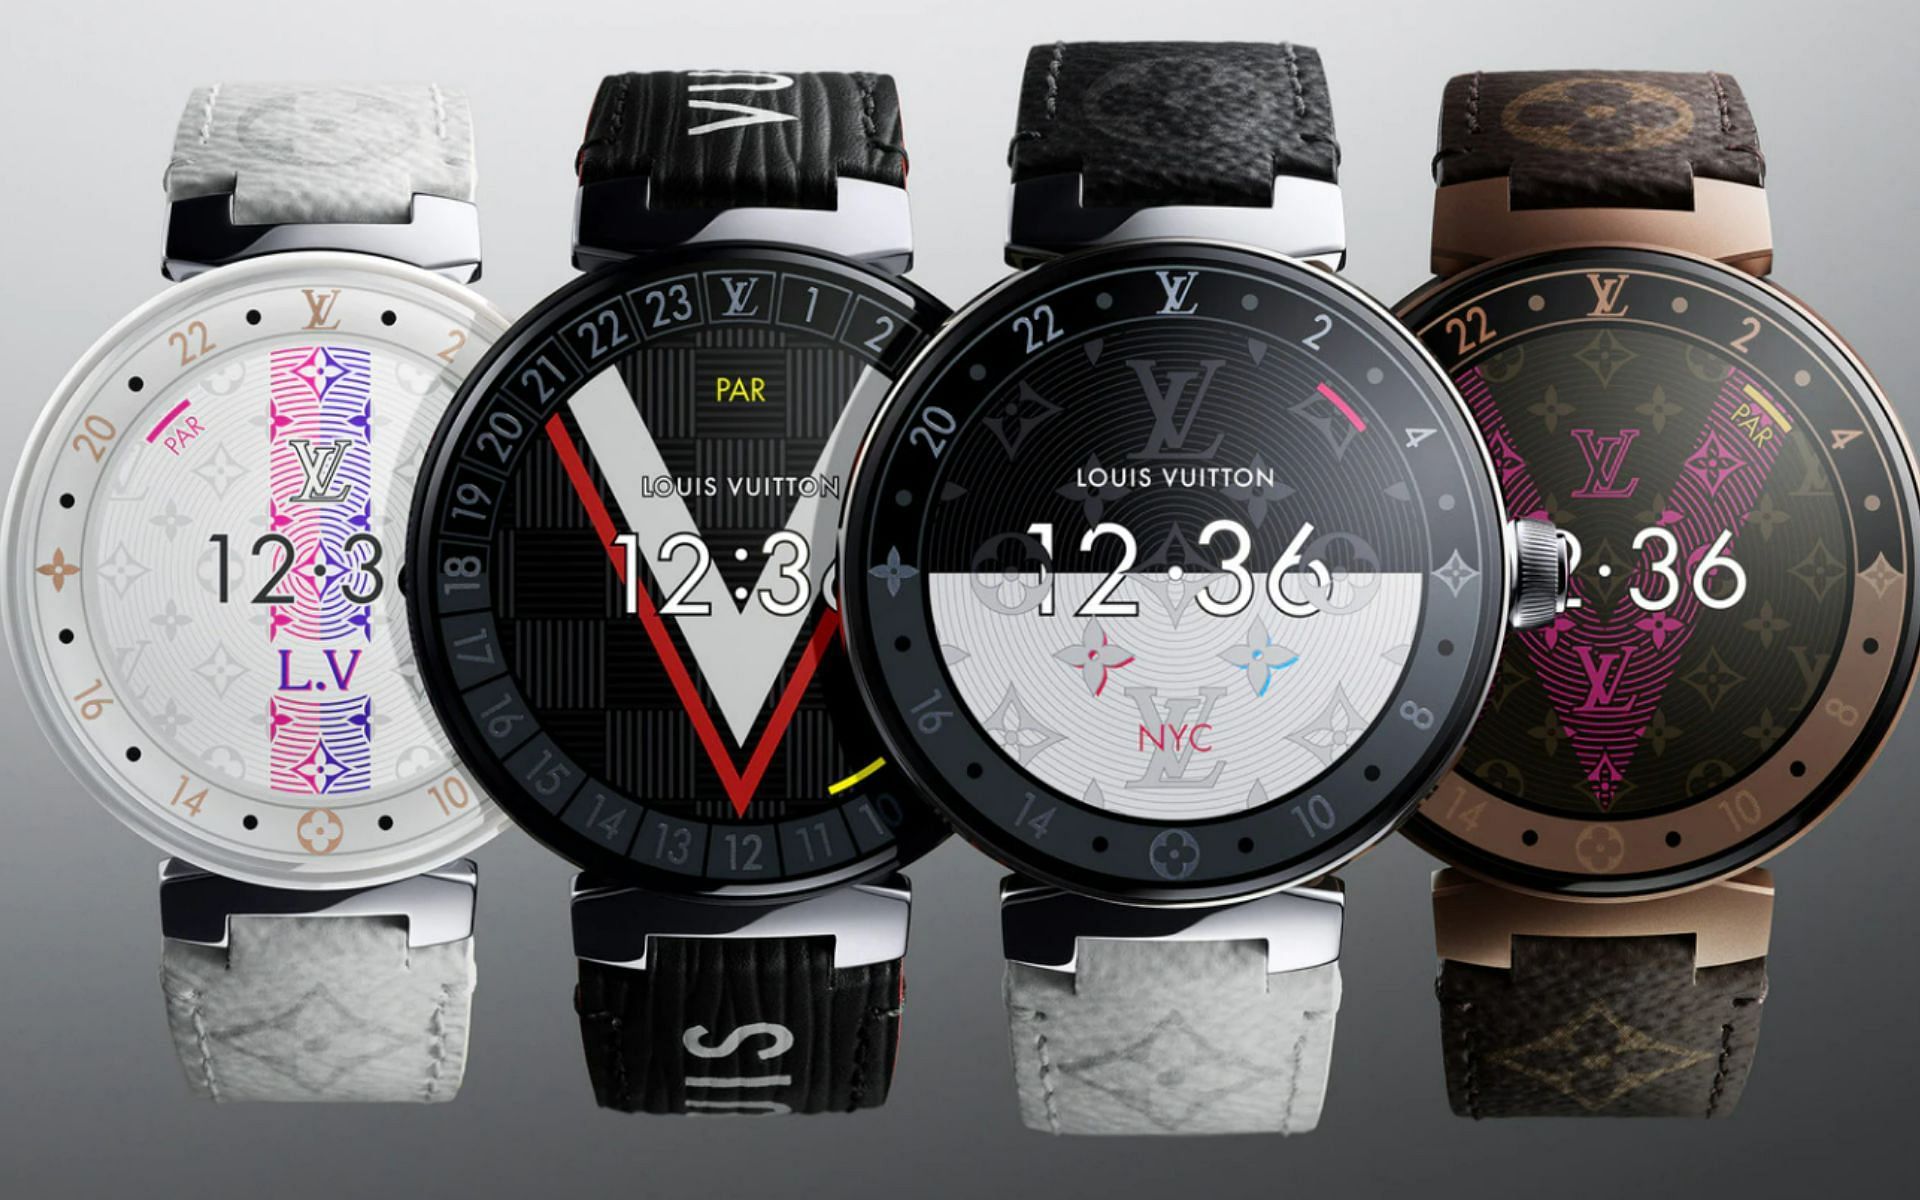 Louis Vuitton launched its first connected watch (Image via Louis Vuitton)